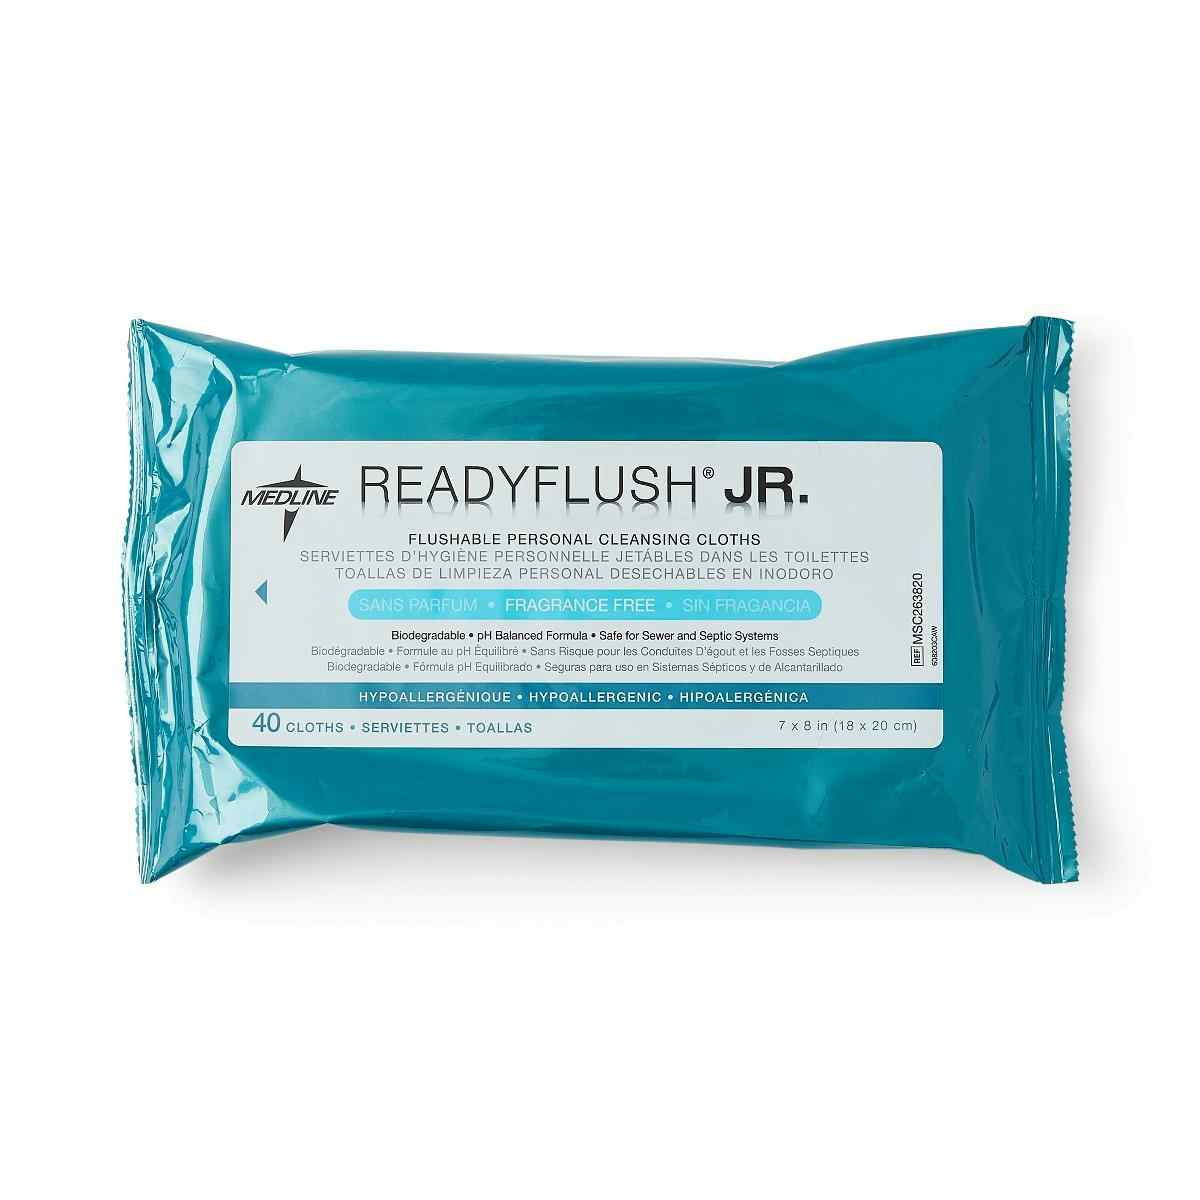 ReadyFlush Jr. Flushable Personal Cleansing Wipes, MSC263820, Fragrance Free - Case of 960